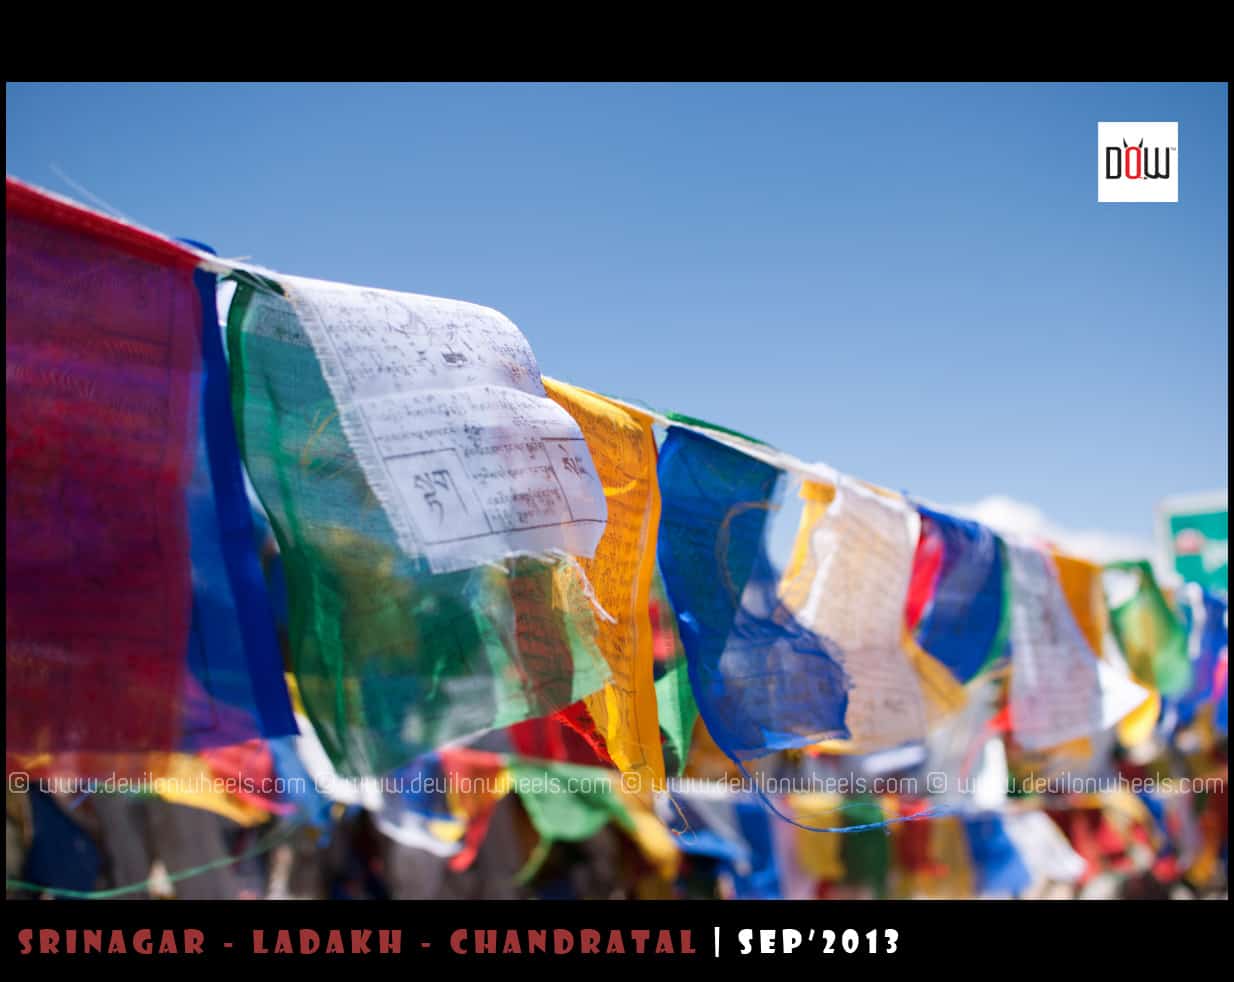 Prayer Flags at Passes... Showering Blessings with the Wind